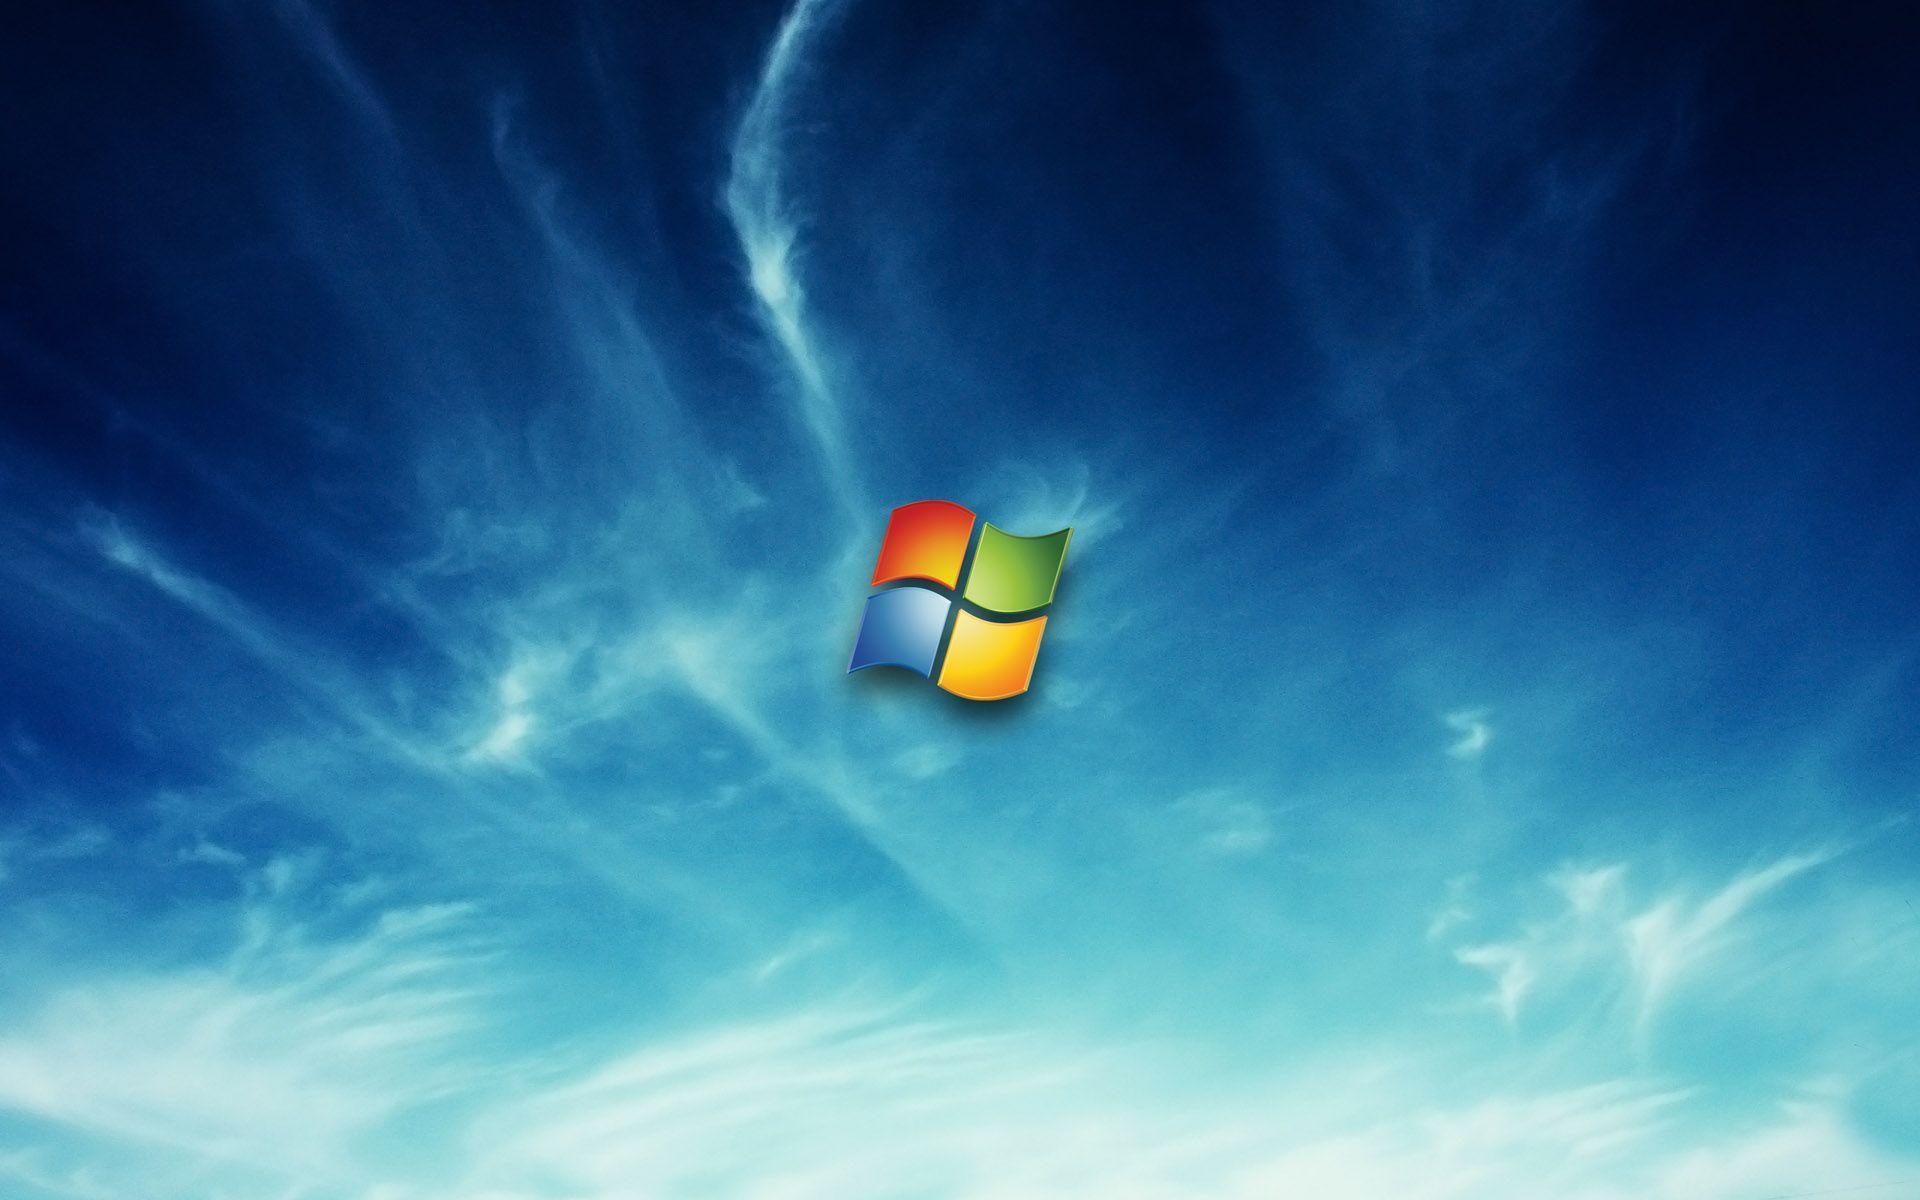 Cool Windows 7 Backgrounds - Wallpaper Cave